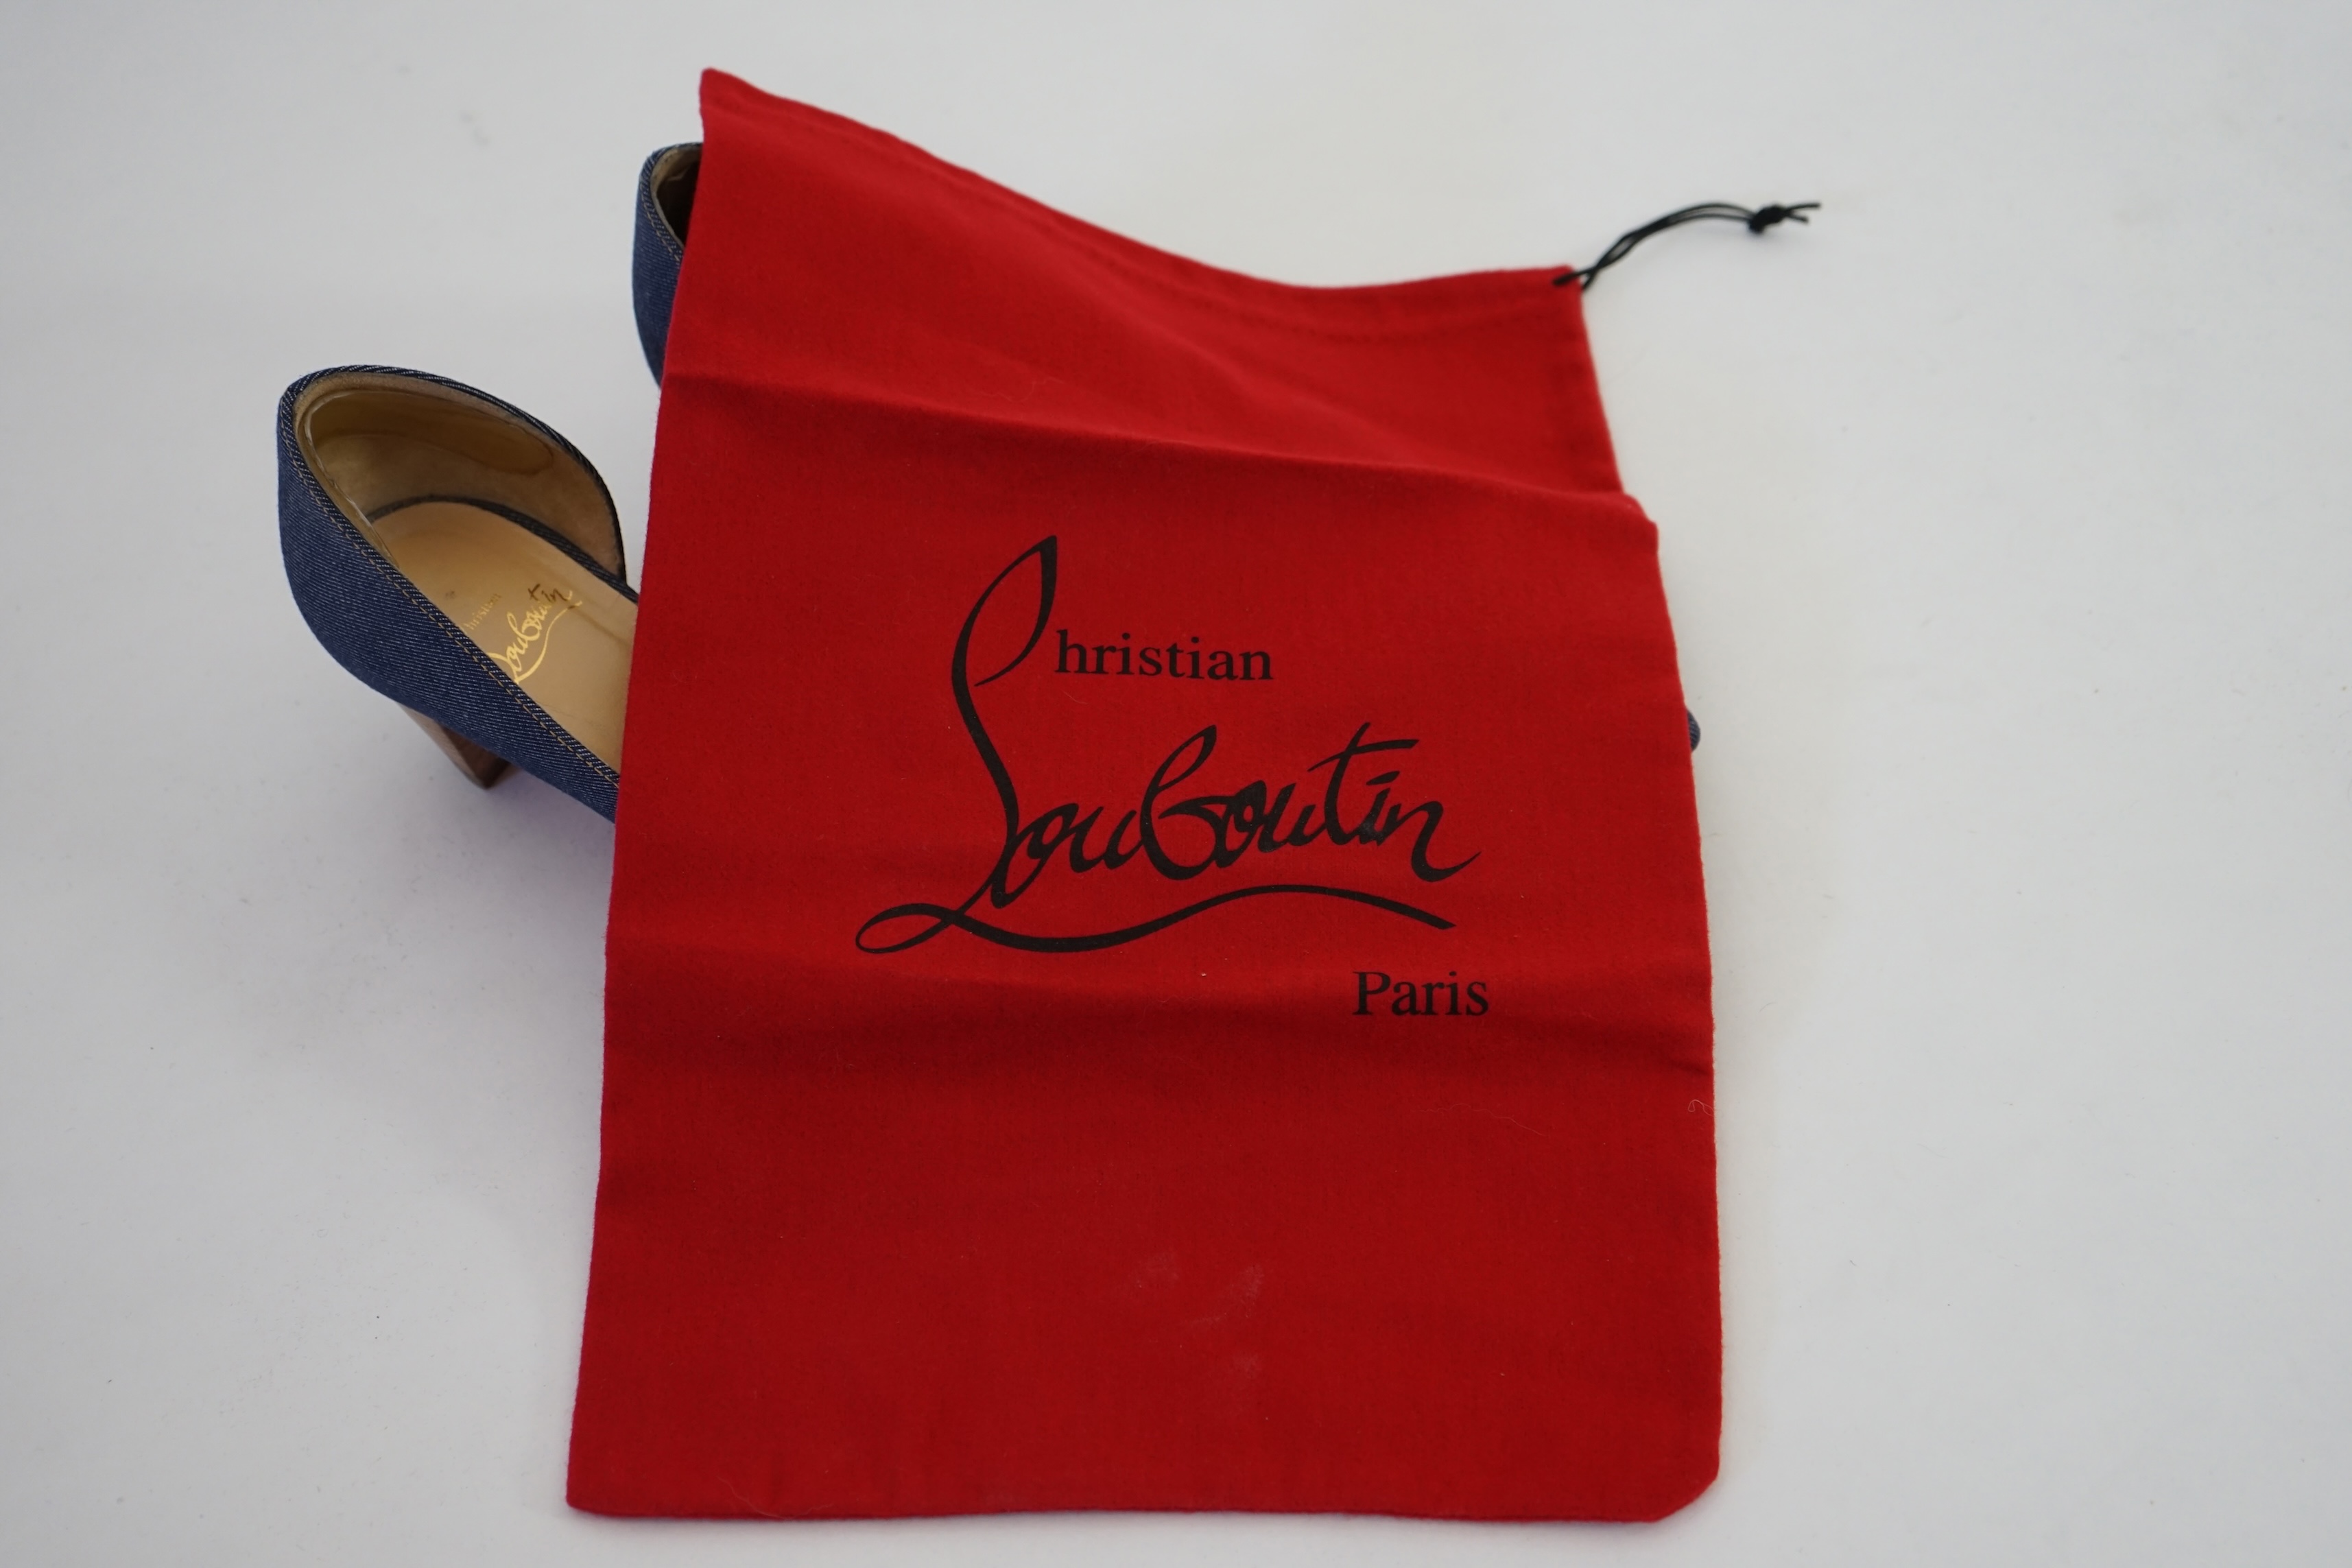 A pair of Christian Louboutin lady's denim pumps with wooden heels, comes with dust bag in original box. Size 39. Proceeds to Happy Paws Puppy Rescue